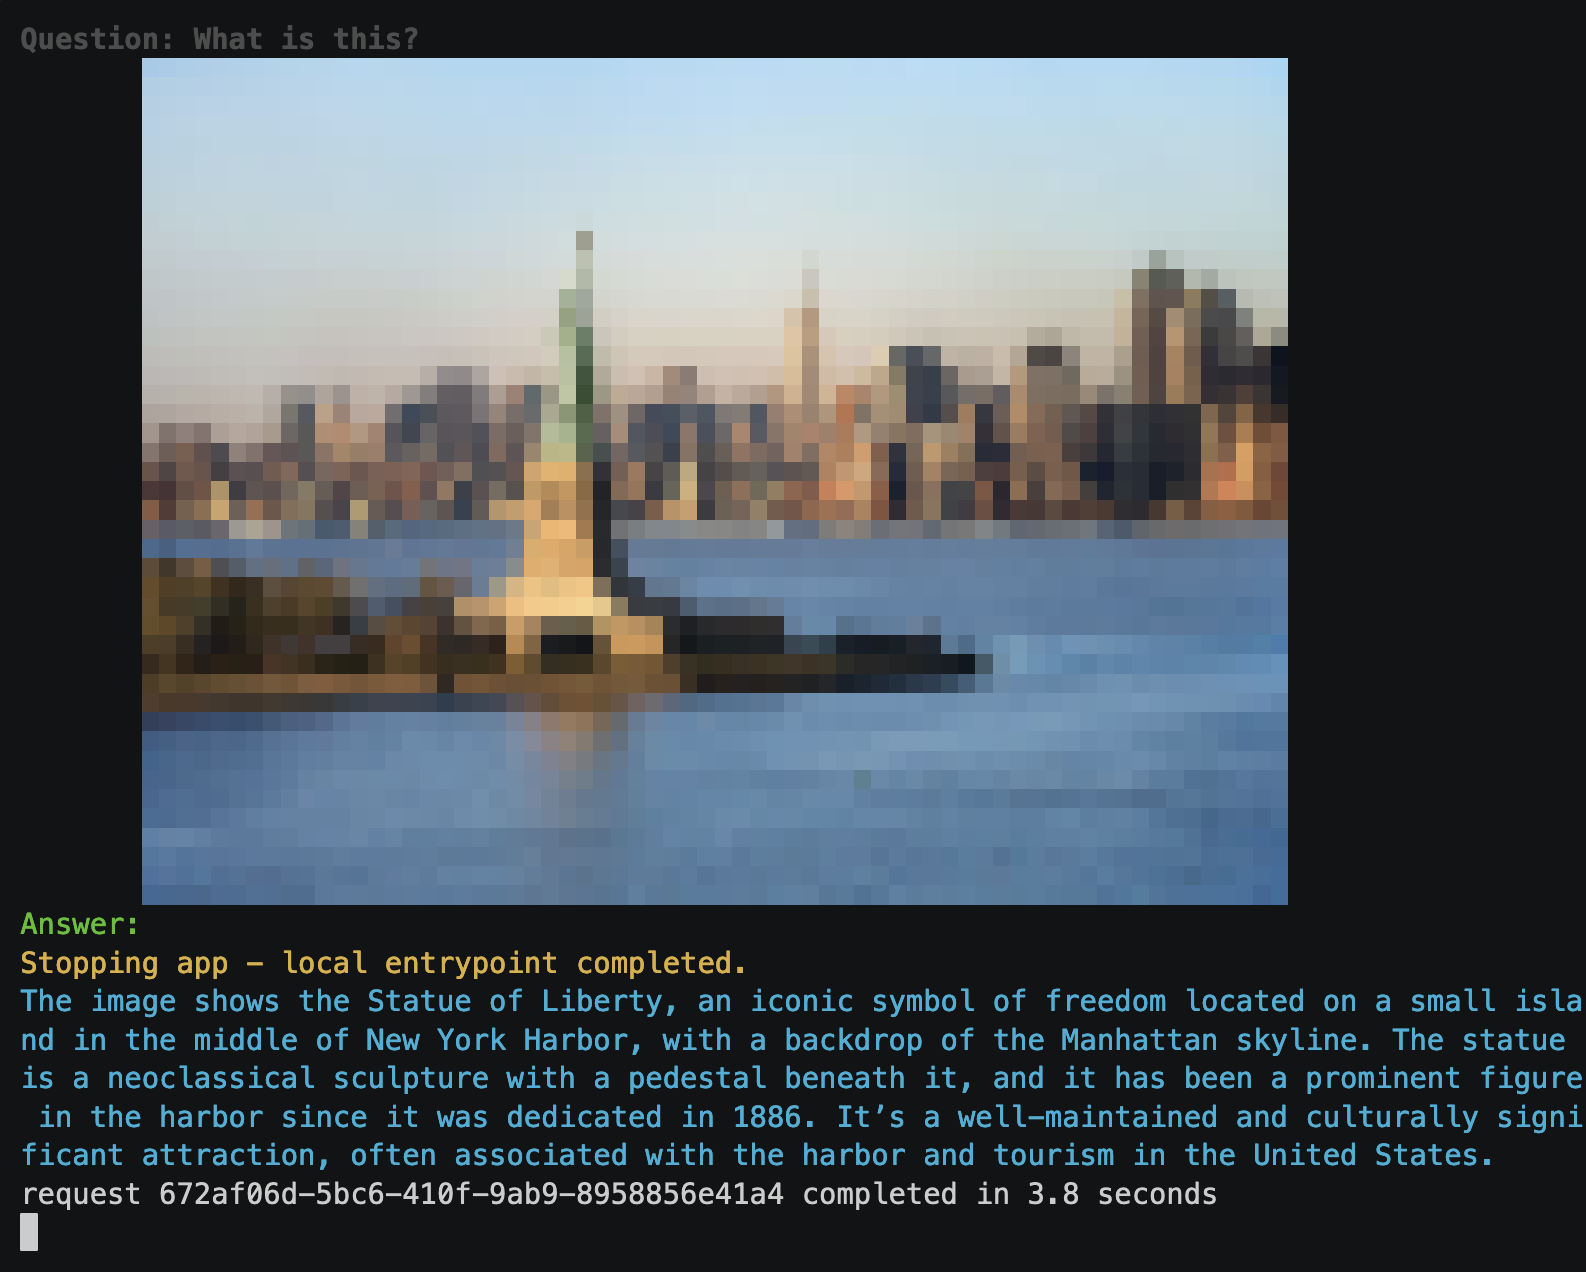 Sample output answering a question about a photo of the Statue of Liberty